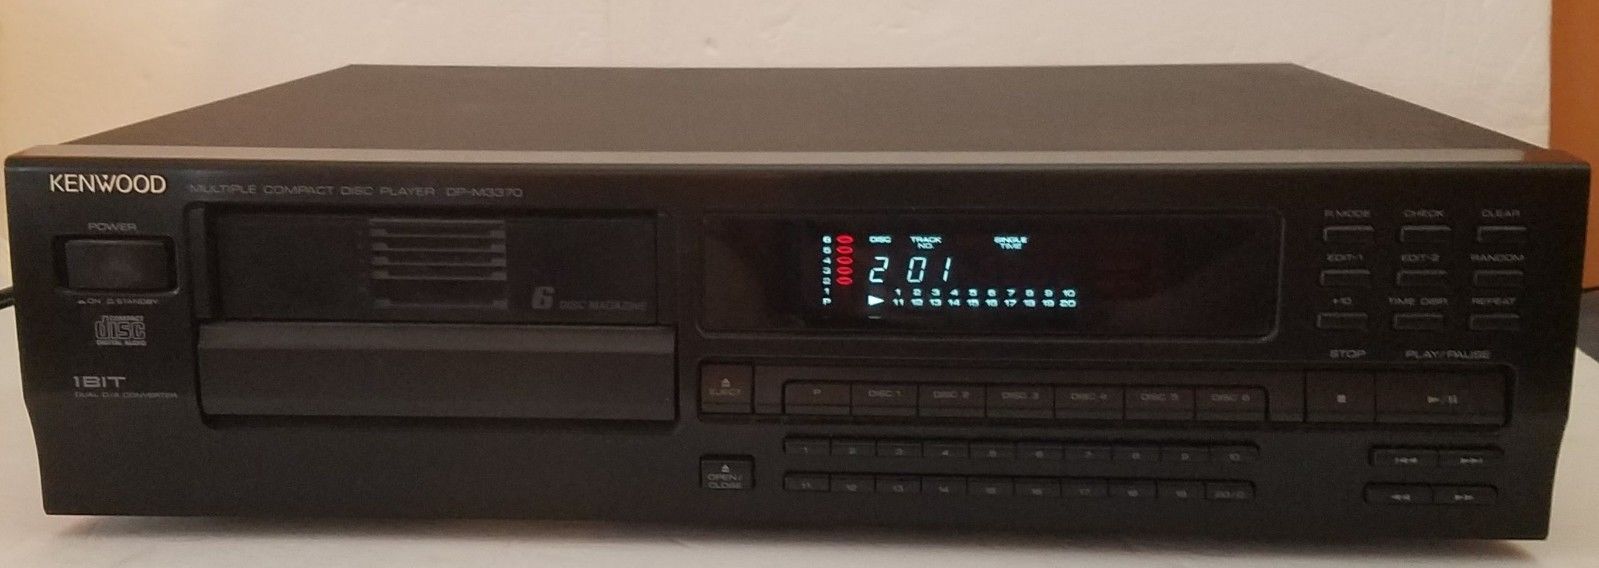 KENWOOD DP-M3370 with 6 Disc Magazine and Single Tray - Tested